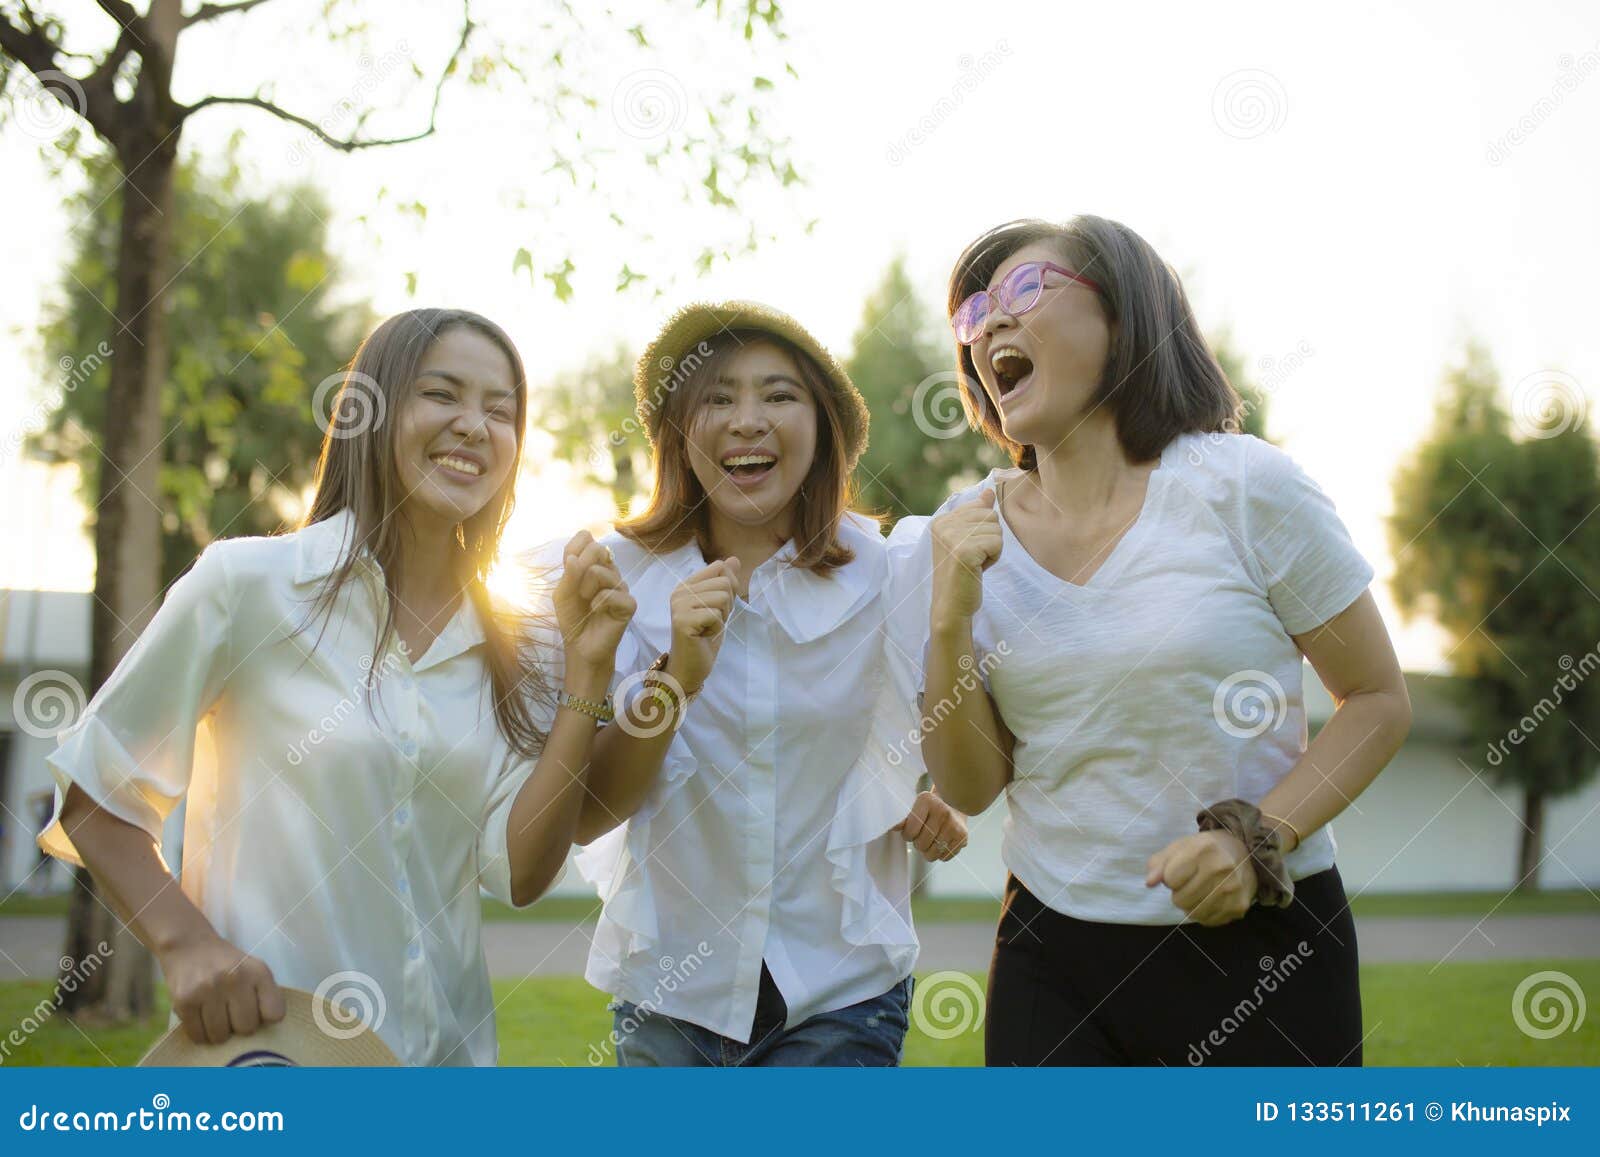 Three Asian Woman Laughing Together With Happiness Emotion Stock Image